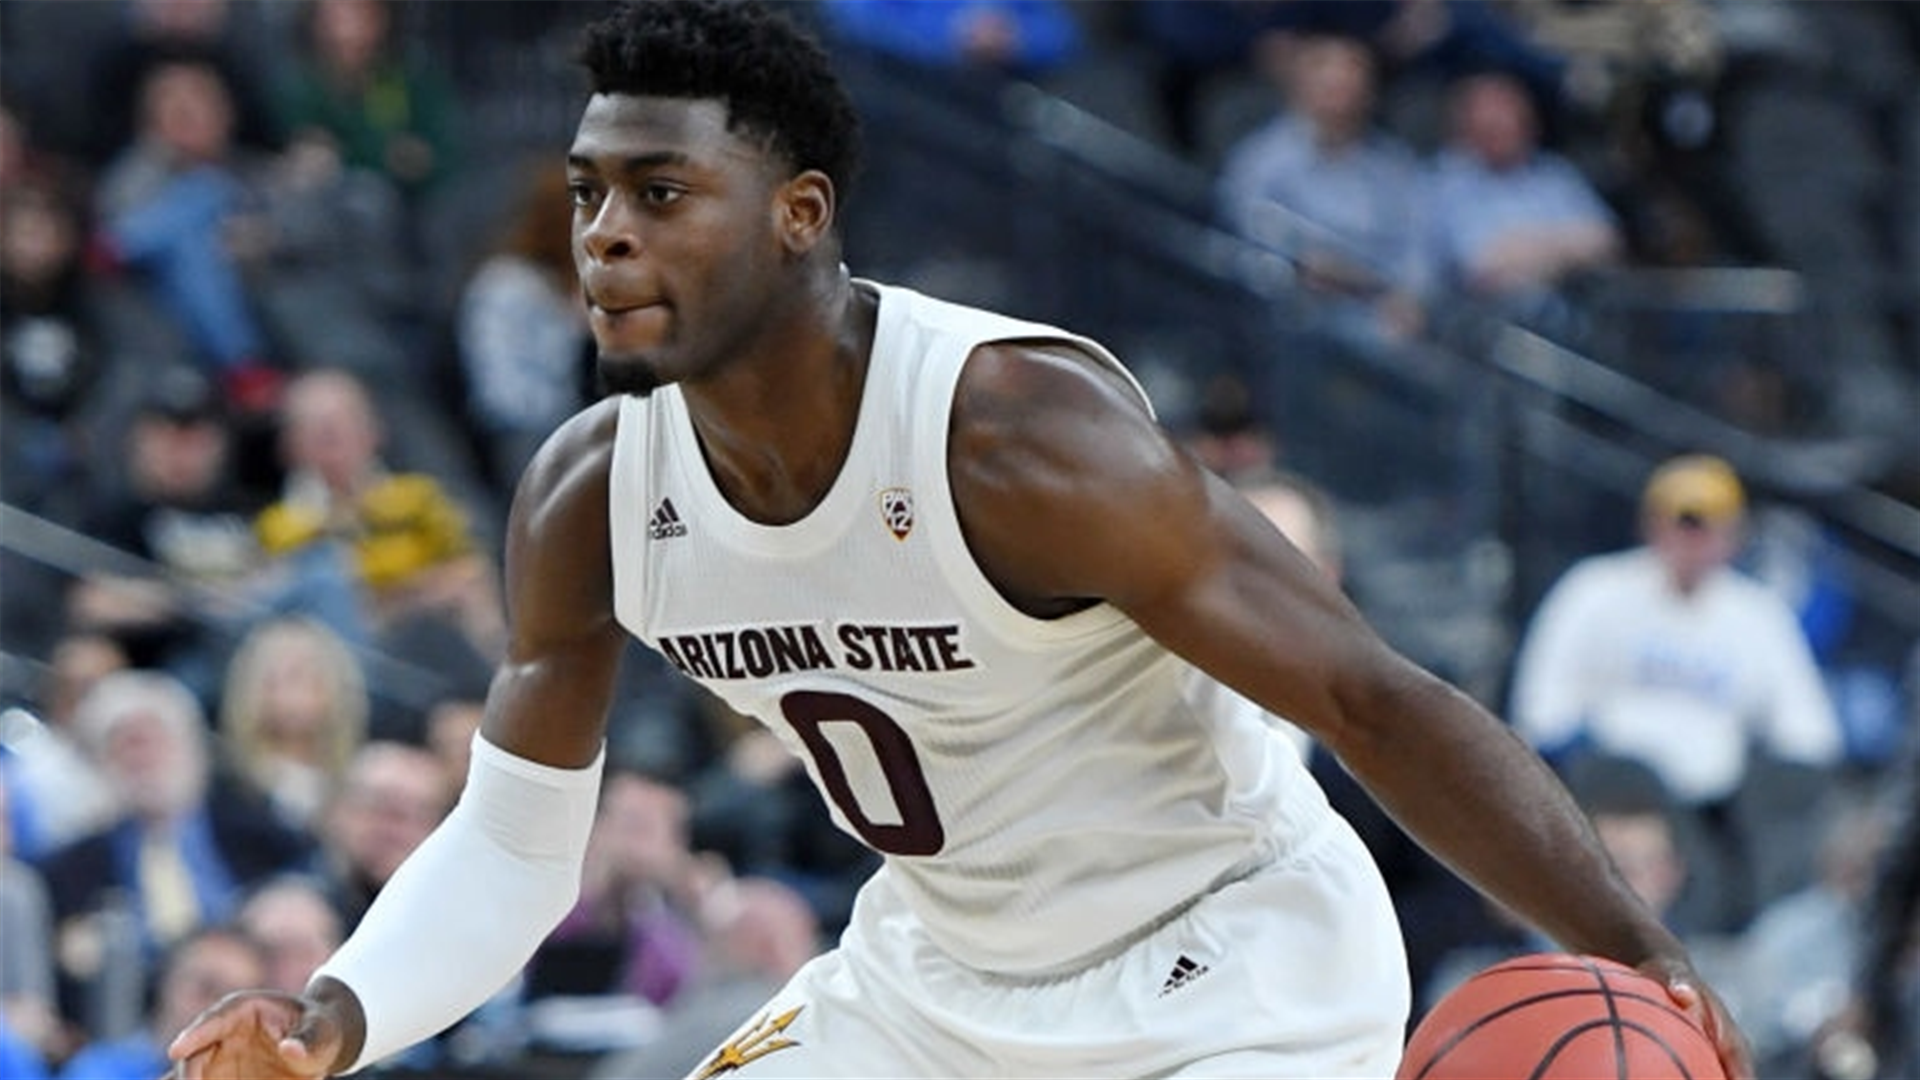 NBA Draft 2019: Luguentz Dort scouting report, strengths, weaknesses and player ...1920 x 1080